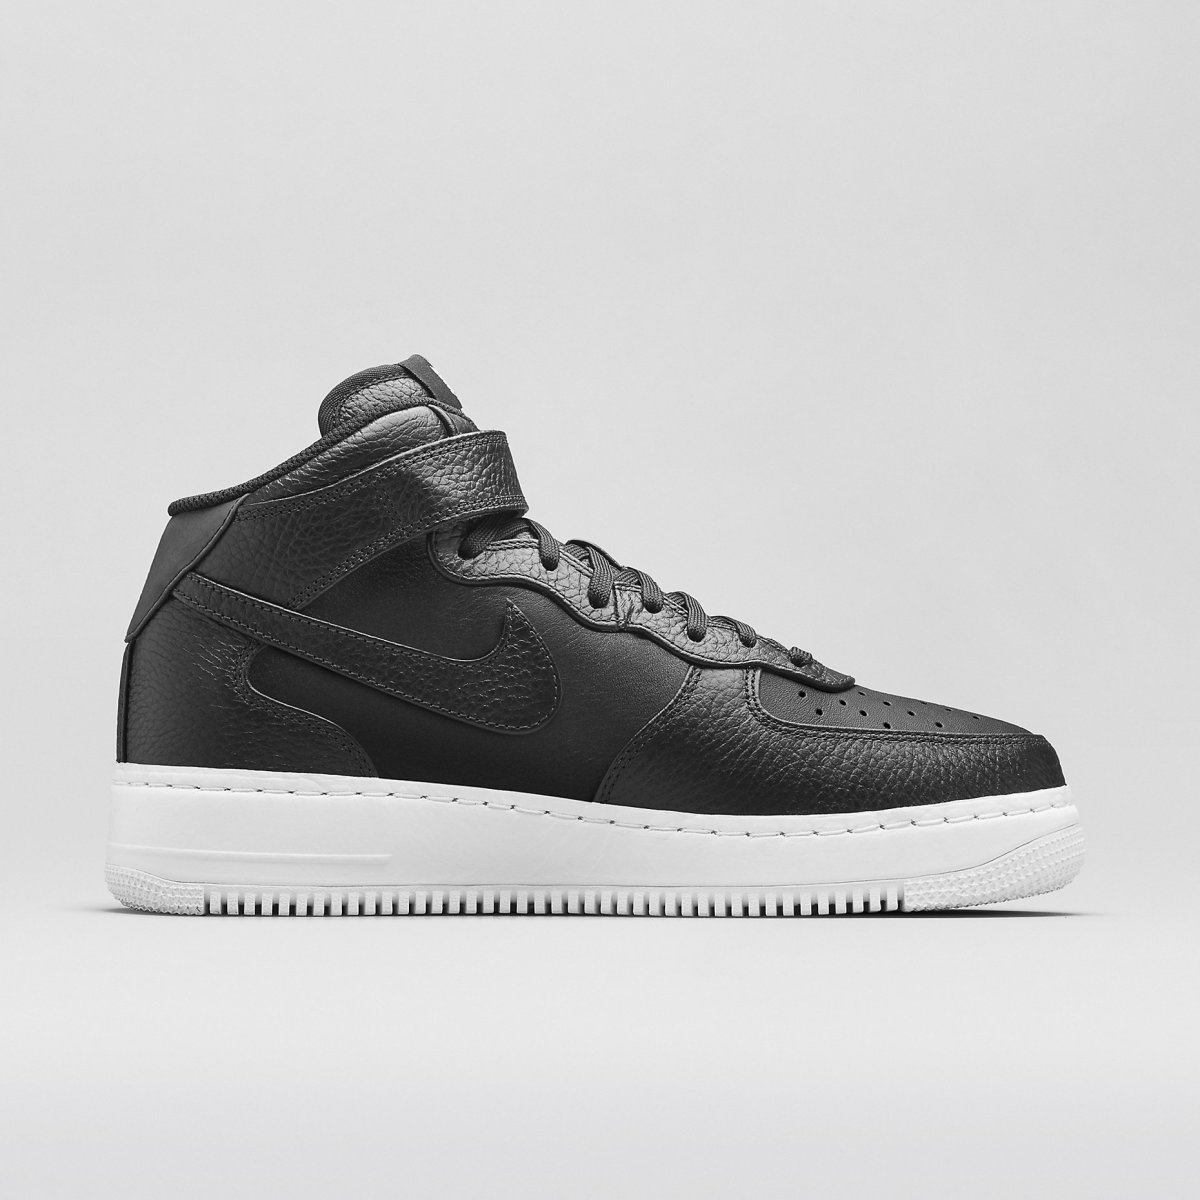 Nike's luxurious Air Force 1 Mid CMFT - Acquire